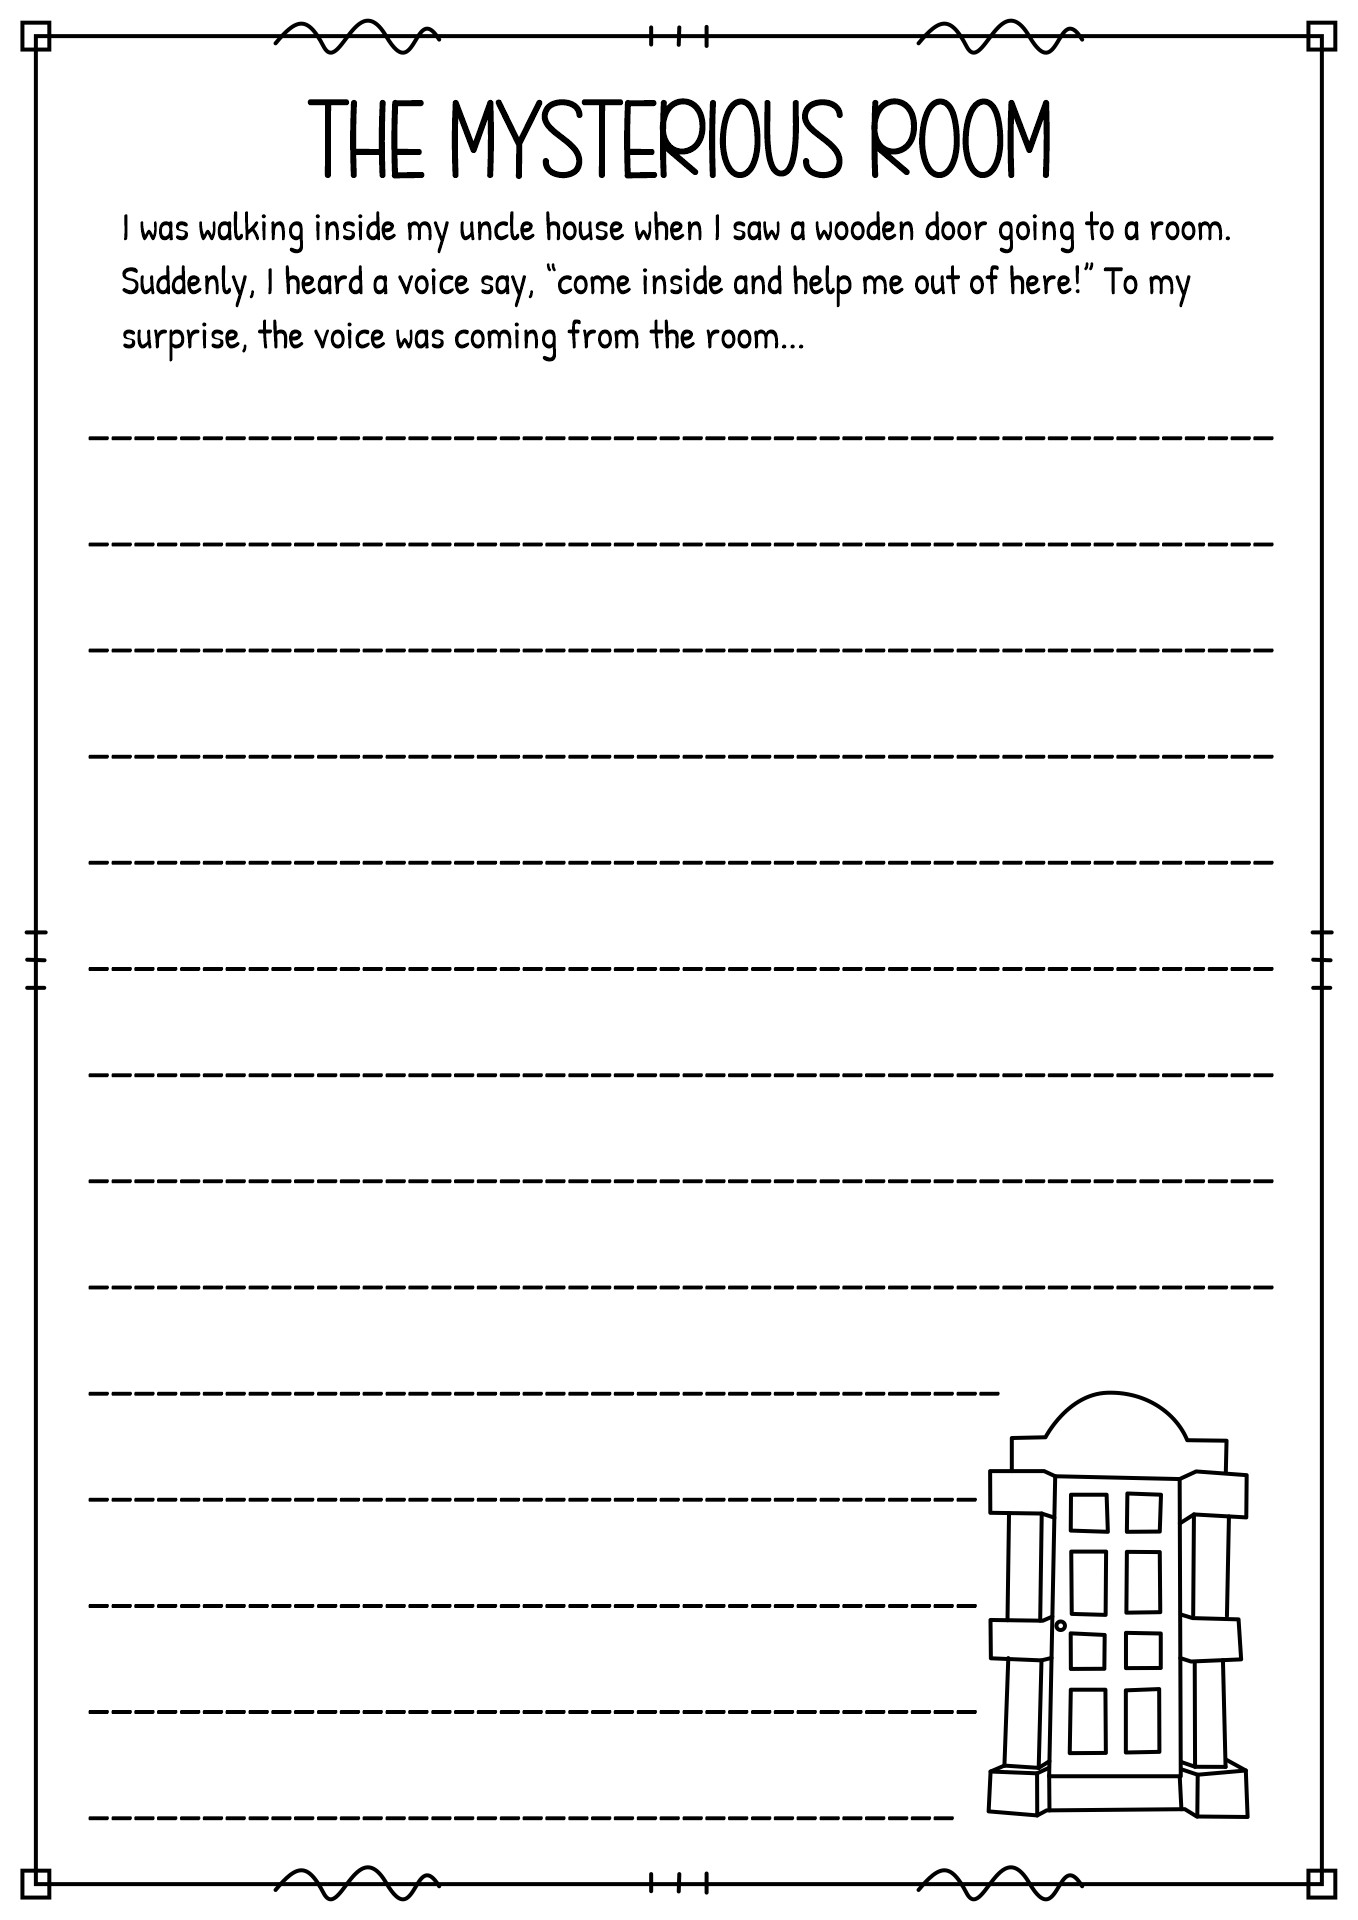 13-best-images-of-printable-worksheets-on-reflections-student